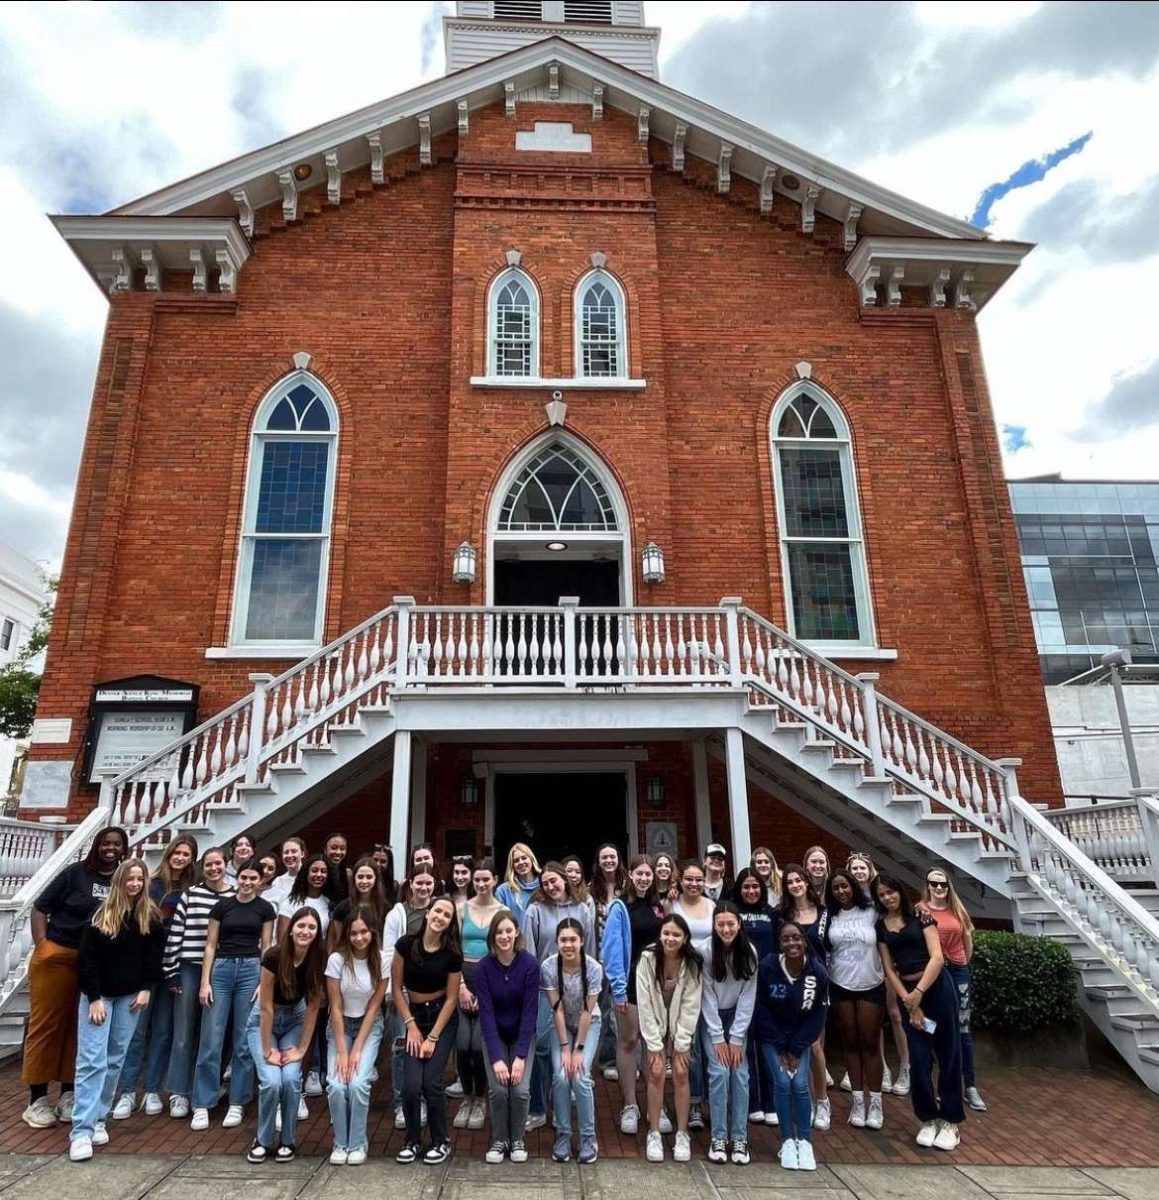 Students+stand+in+front+of+the+Dexter+Avenue+King+Memorial+Baptist+Church+in+Montgomery%2C+Alabama.+Students+on+the+Shirts+Across+America+program+visit+a+variety+of+historical+sites+and+build+houses.